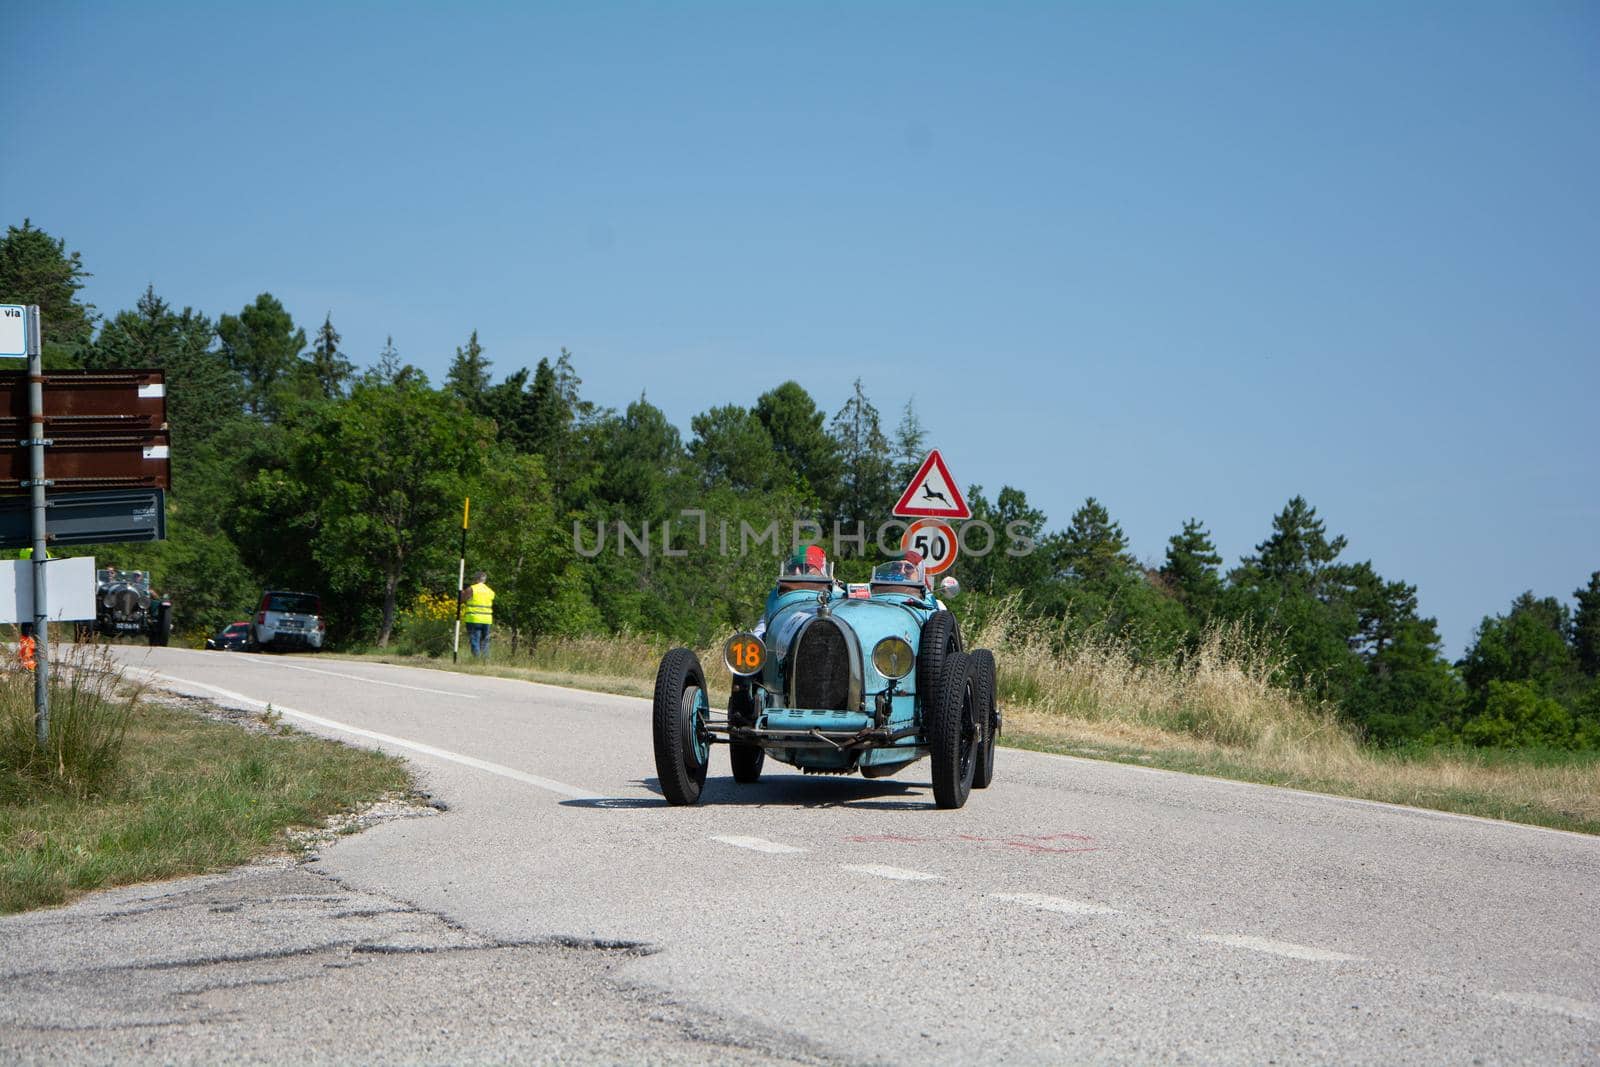 BUGATTI T35 1925 on an old racing car in rally Mille Miglia 2022 the famous italian historical race (1927-1957 by massimocampanari